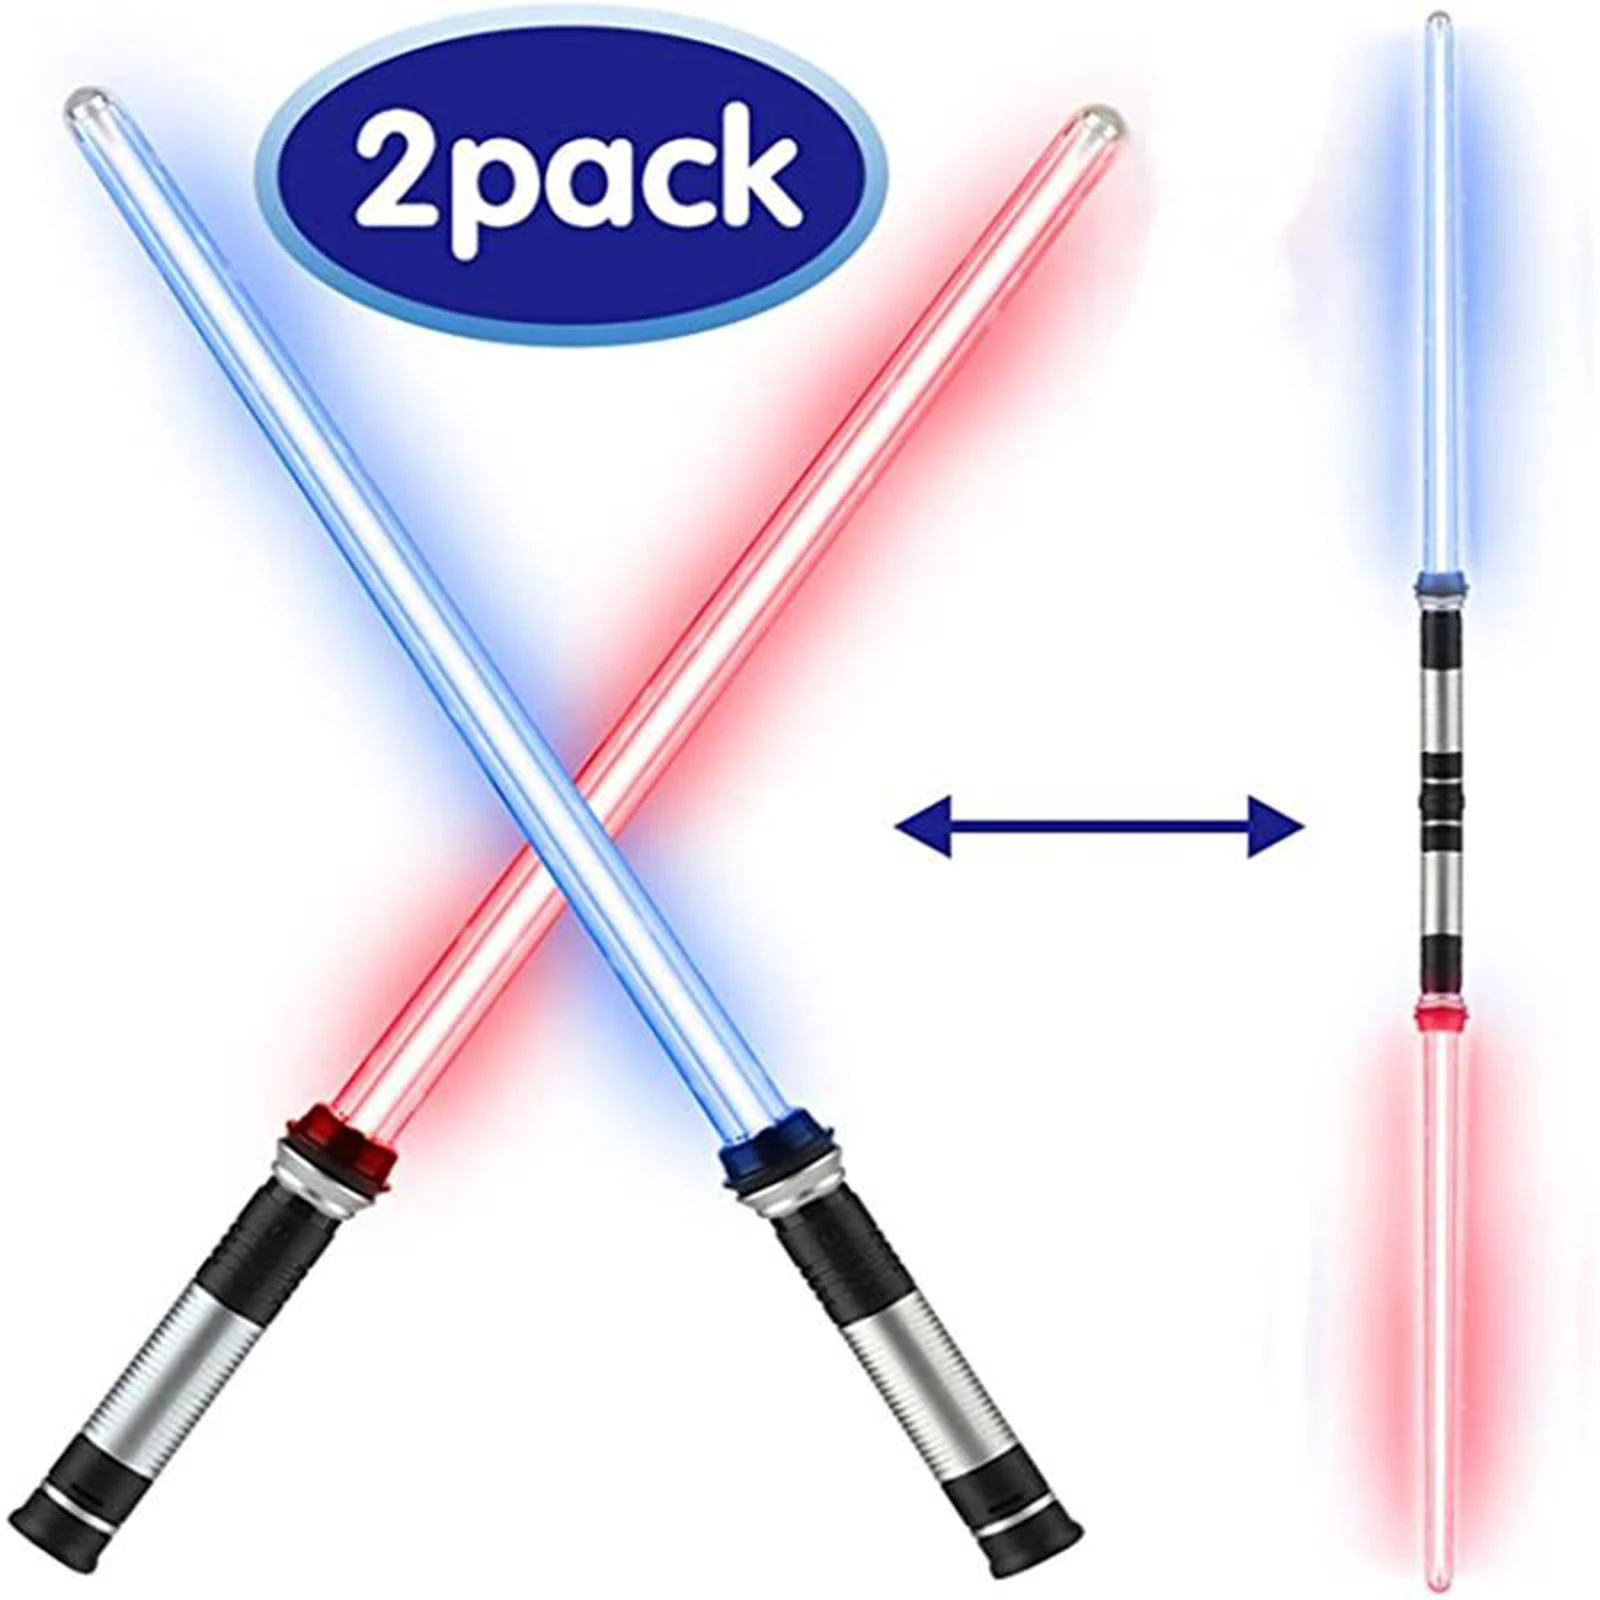 Flashing Lightsaber Light Up 7 Color Changing w/ Sound Costume War Fighters and Warriors Kid Gift Xmas Presents